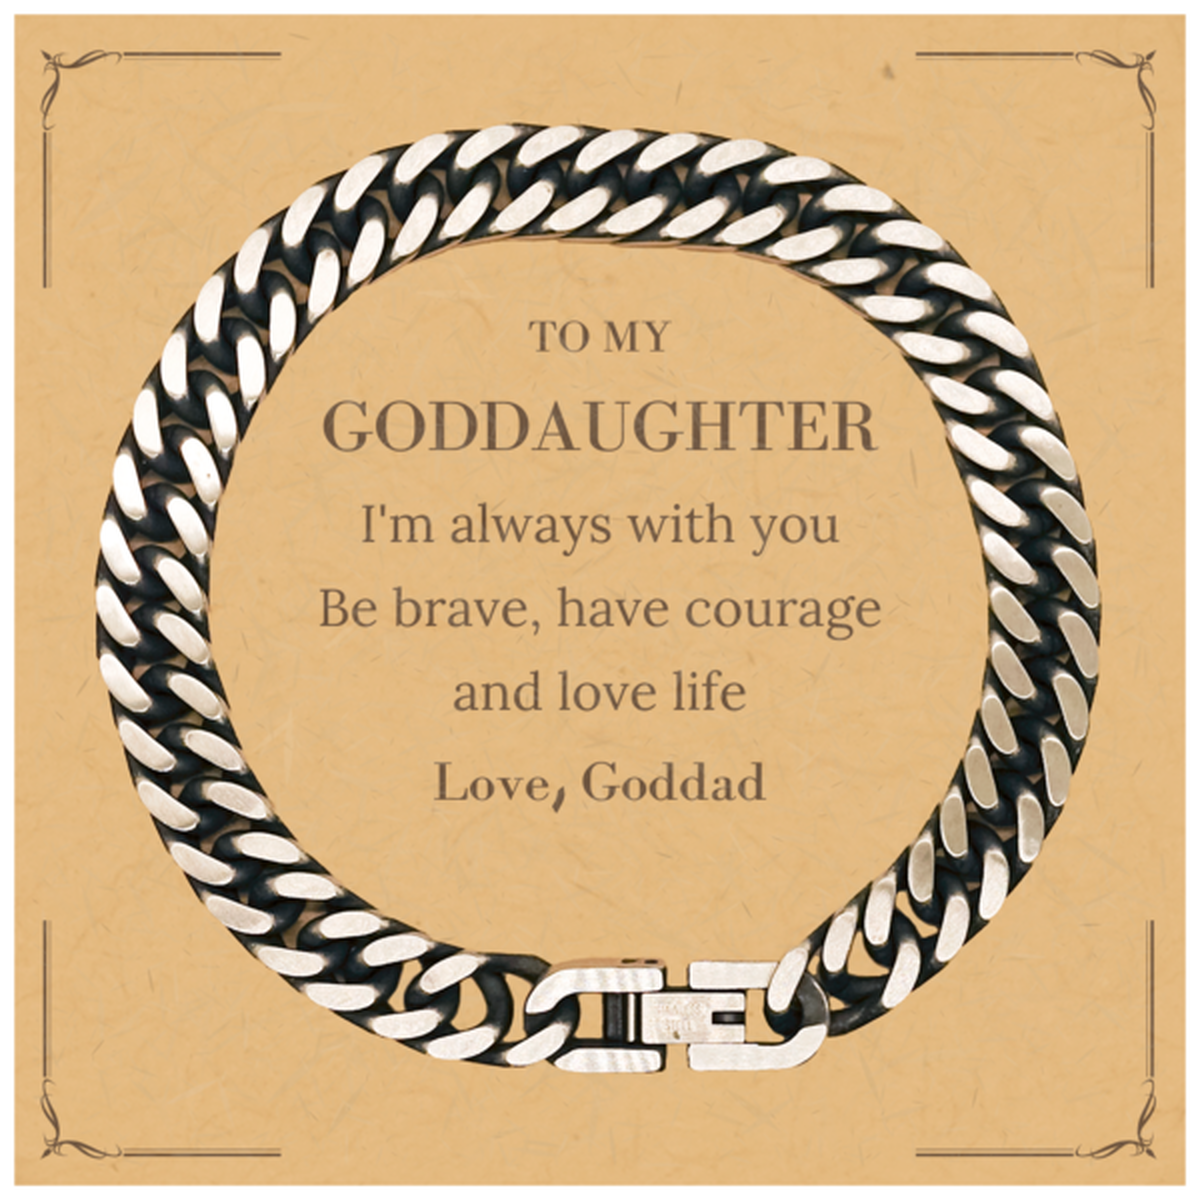 To My Goddaughter Gifts from Goddad, Unique Cuban Link Chain Bracelet Inspirational Christmas Birthday Graduation Gifts for Goddaughter I'm always with you. Be brave, have courage and love life. Love, Goddad